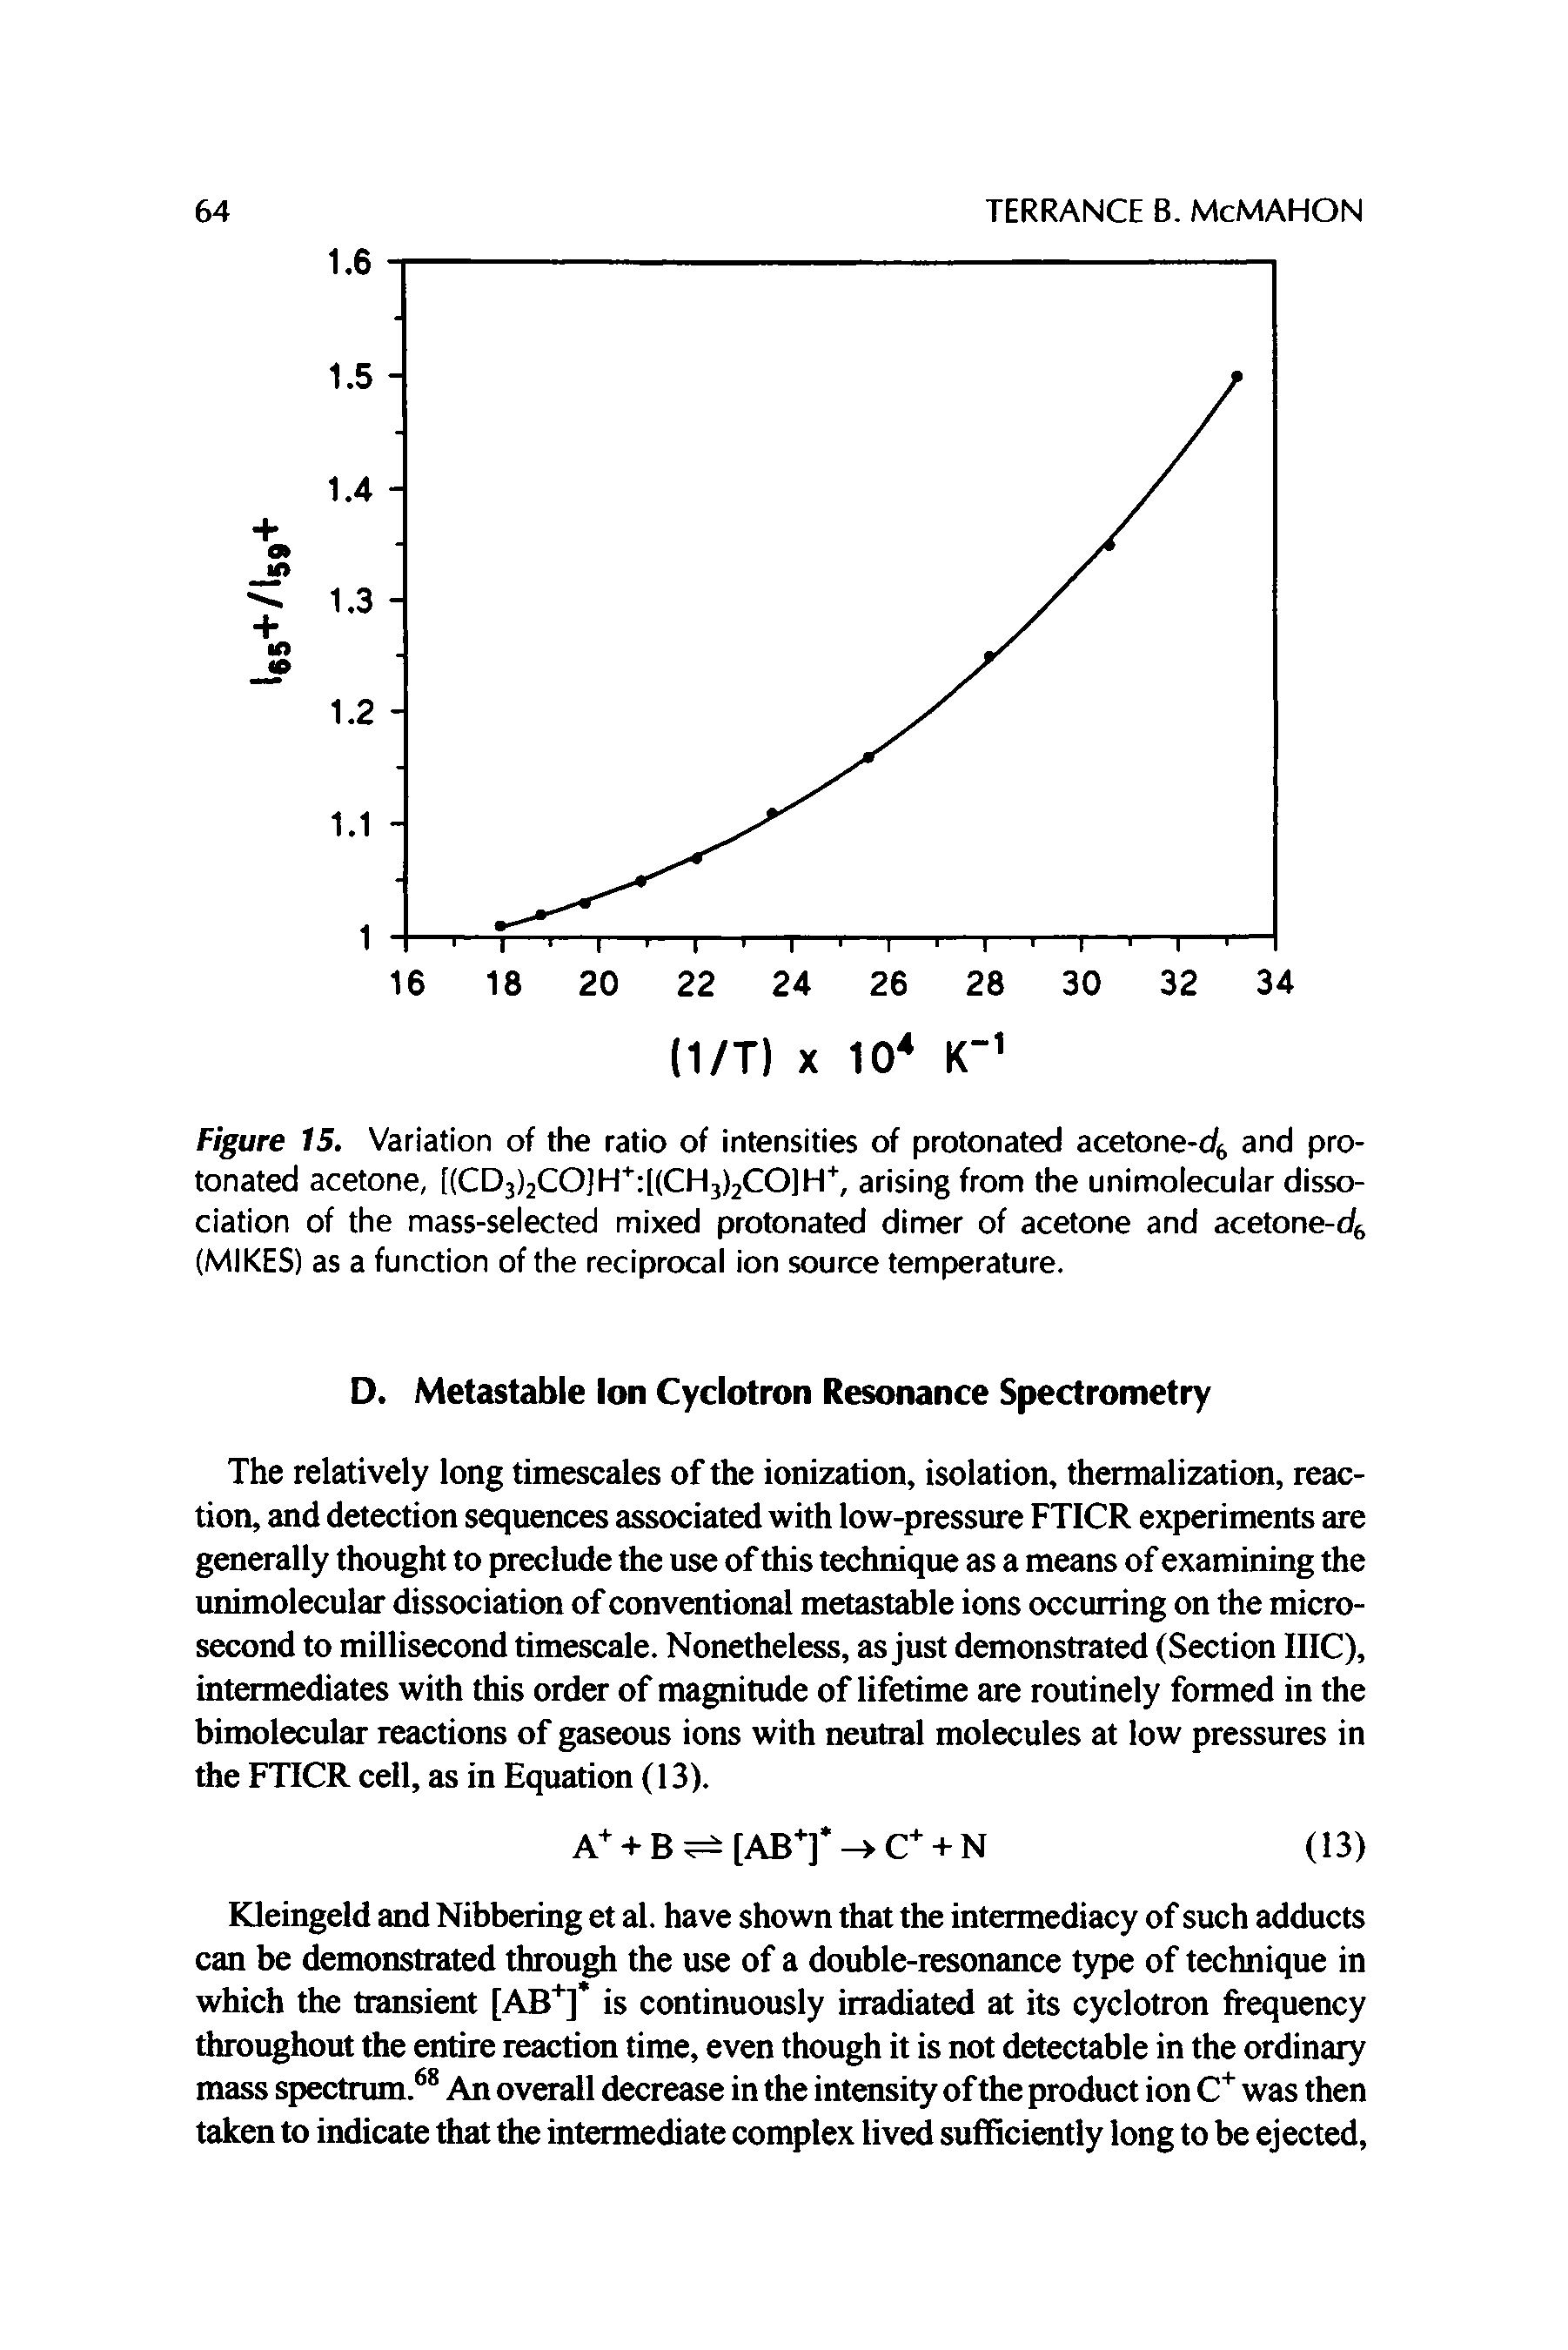 Figure 15. Variation of the ratio of intensities of protonated acetone-c4 and pro-tonated acetone, [(CD3)2CO]H [(CH3)2CO]H arising from the unimolecular dissociation of the mass-selected mixed protonated dimer of acetone and acetone-ds (MIKES) as a function of the reciprocal ion source temperature.